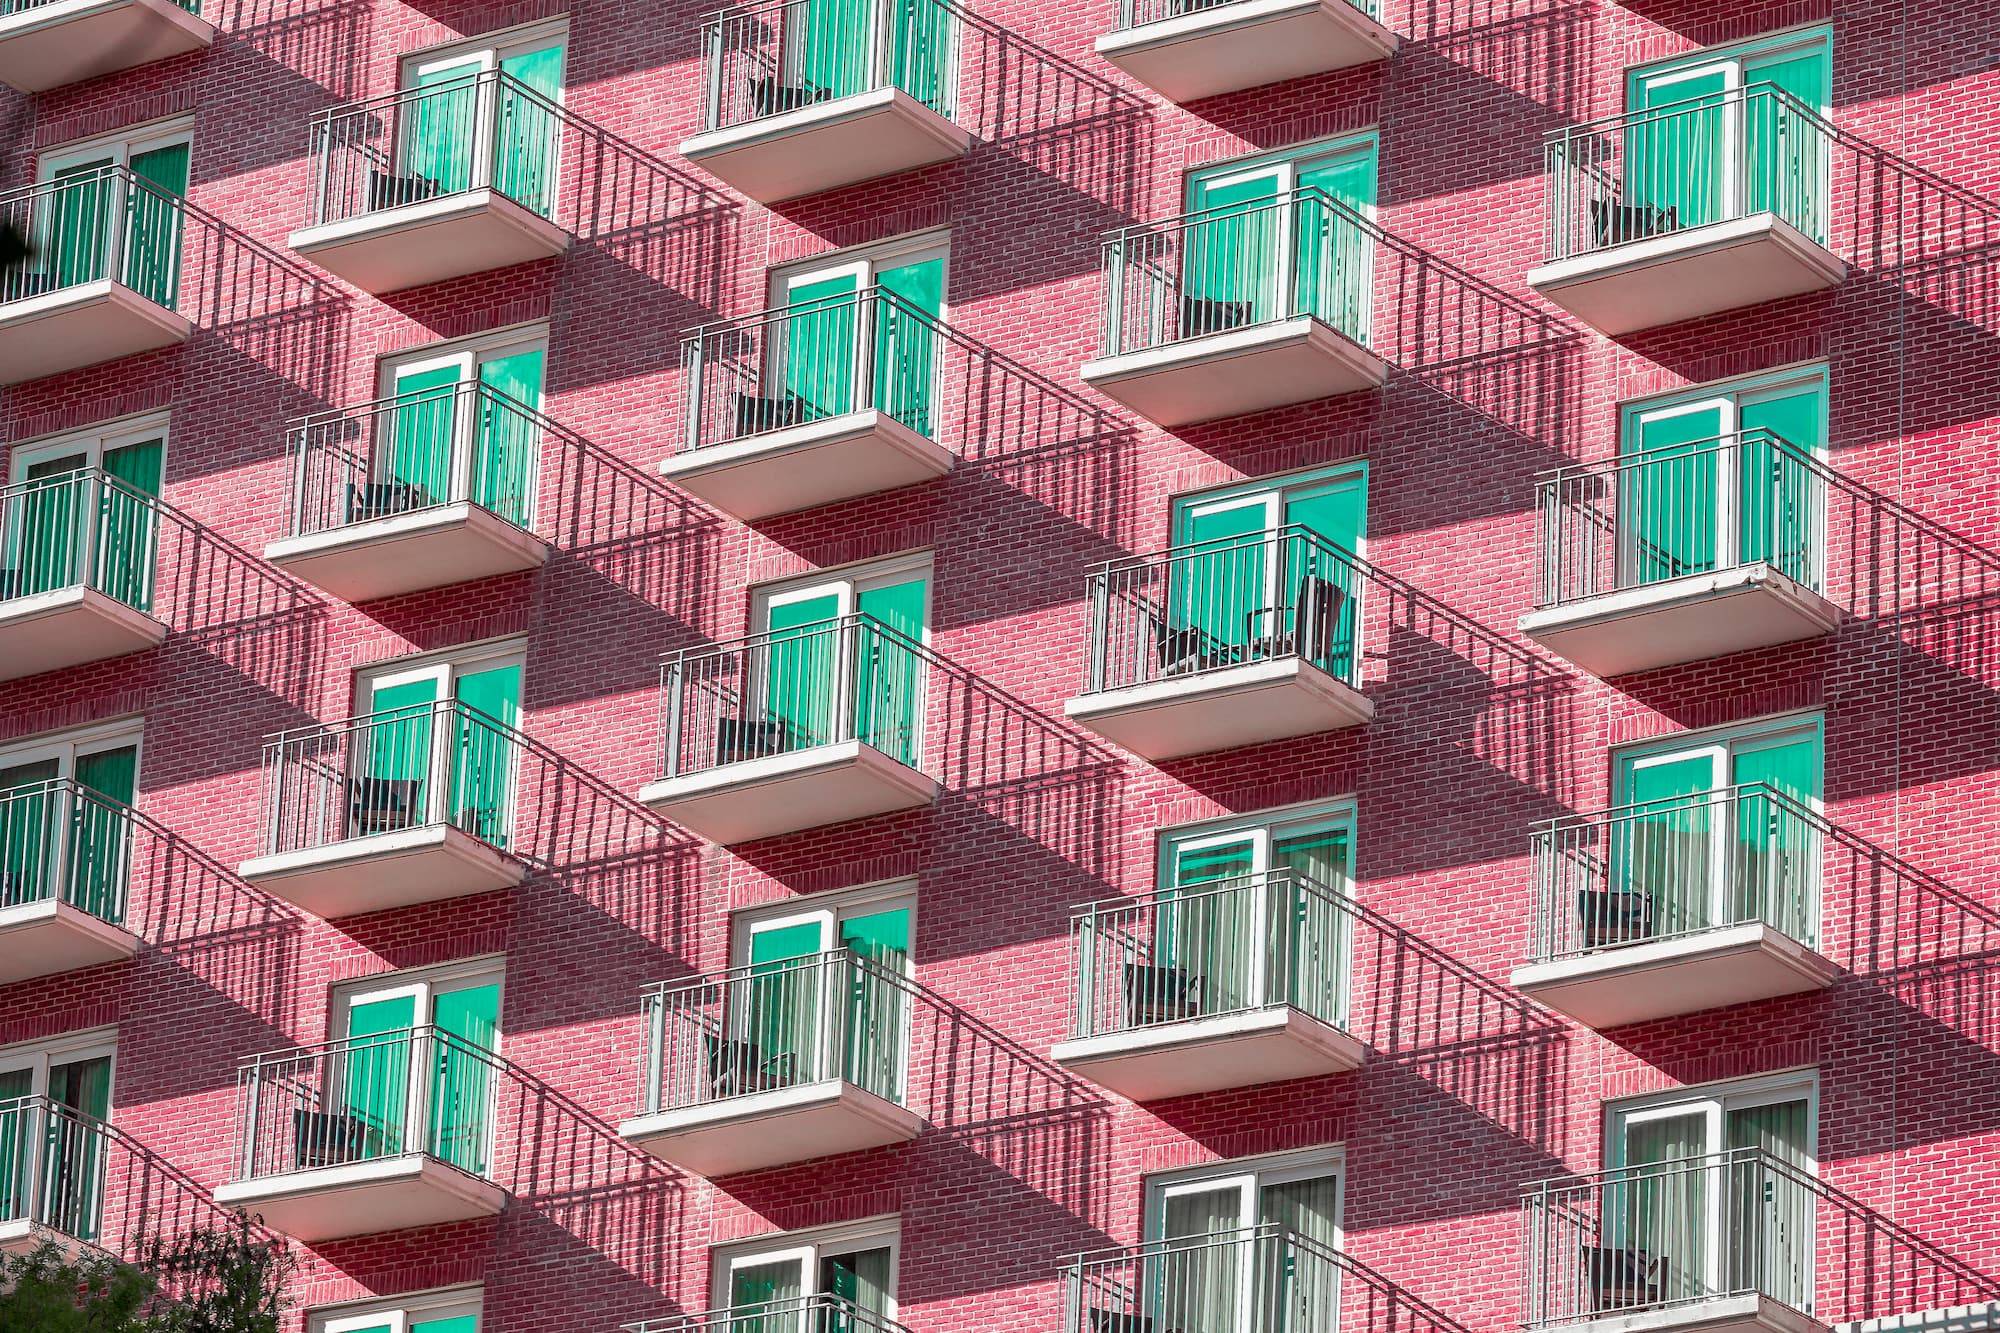 Pink hotel building with blue windows forming patterns and shadow in San Antonio Texas